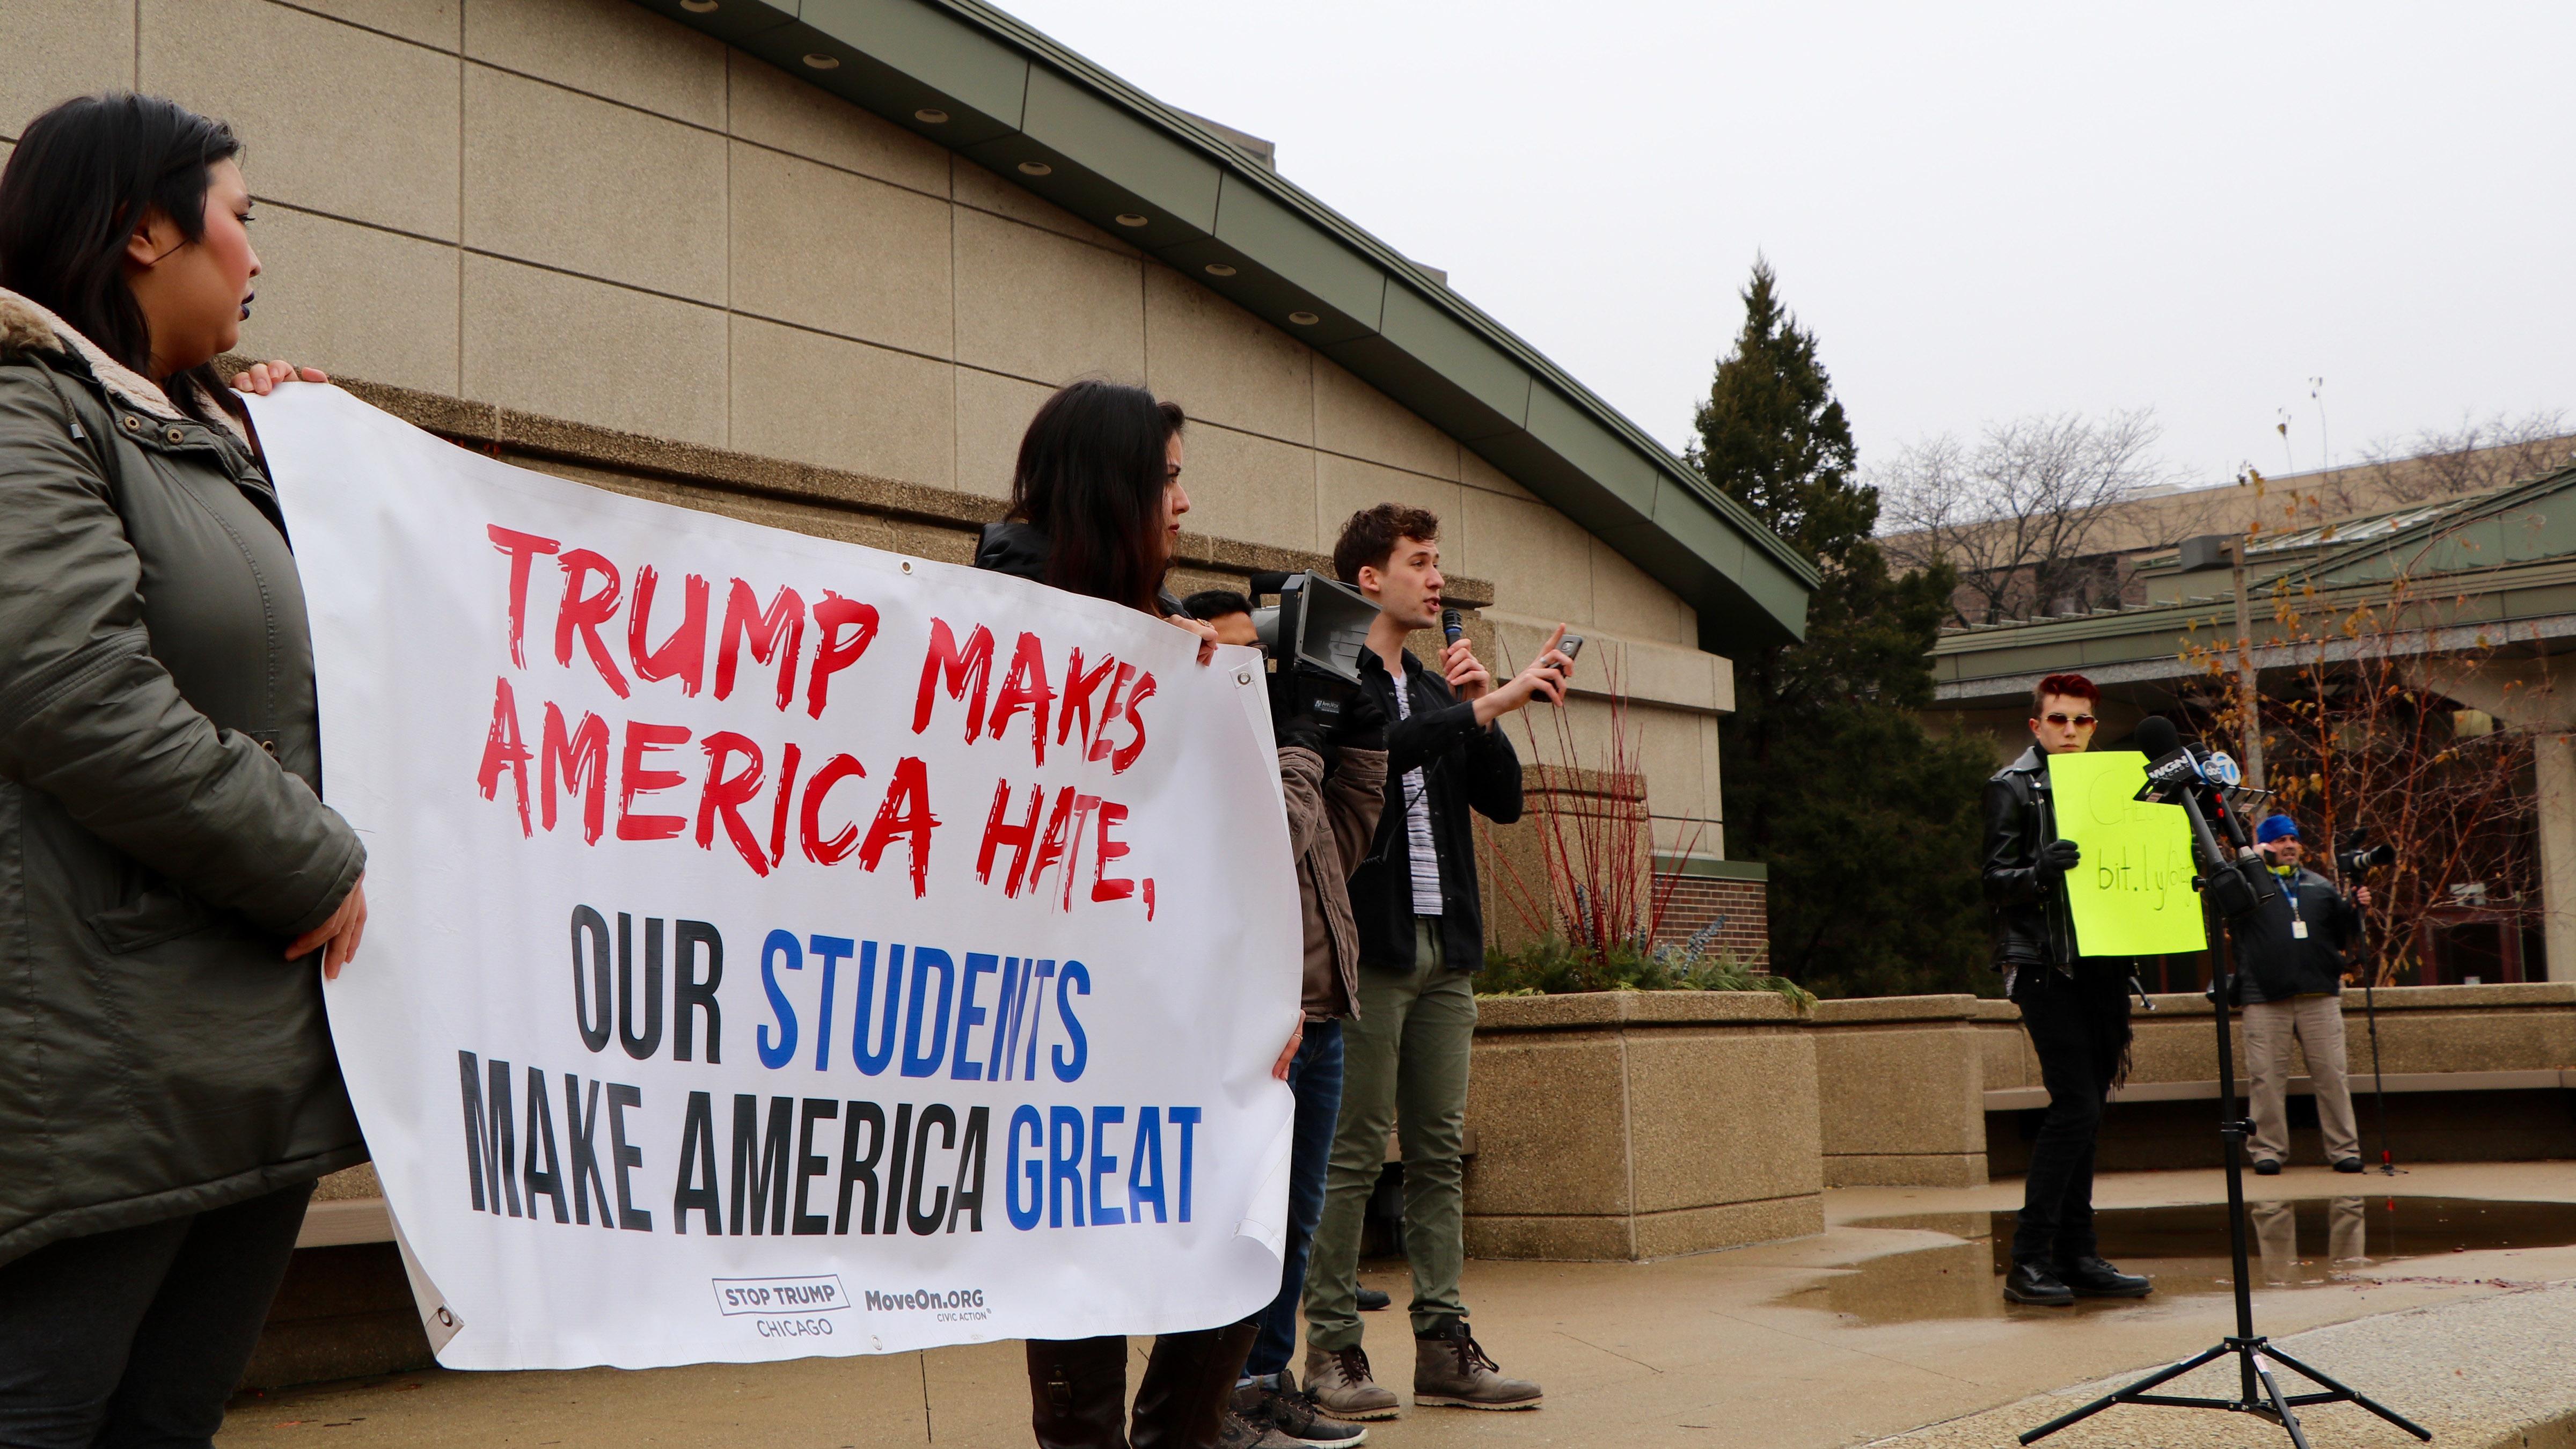 Records show that Chicago police used social media to monitor protests of President Donald Trump’s inauguration in January 2017. Here, University of Illinois at Chicago students protest Trump’s inauguration after walking out of class on Jan. 20, 2017. (Evan Garcia / Chicago Tonight)